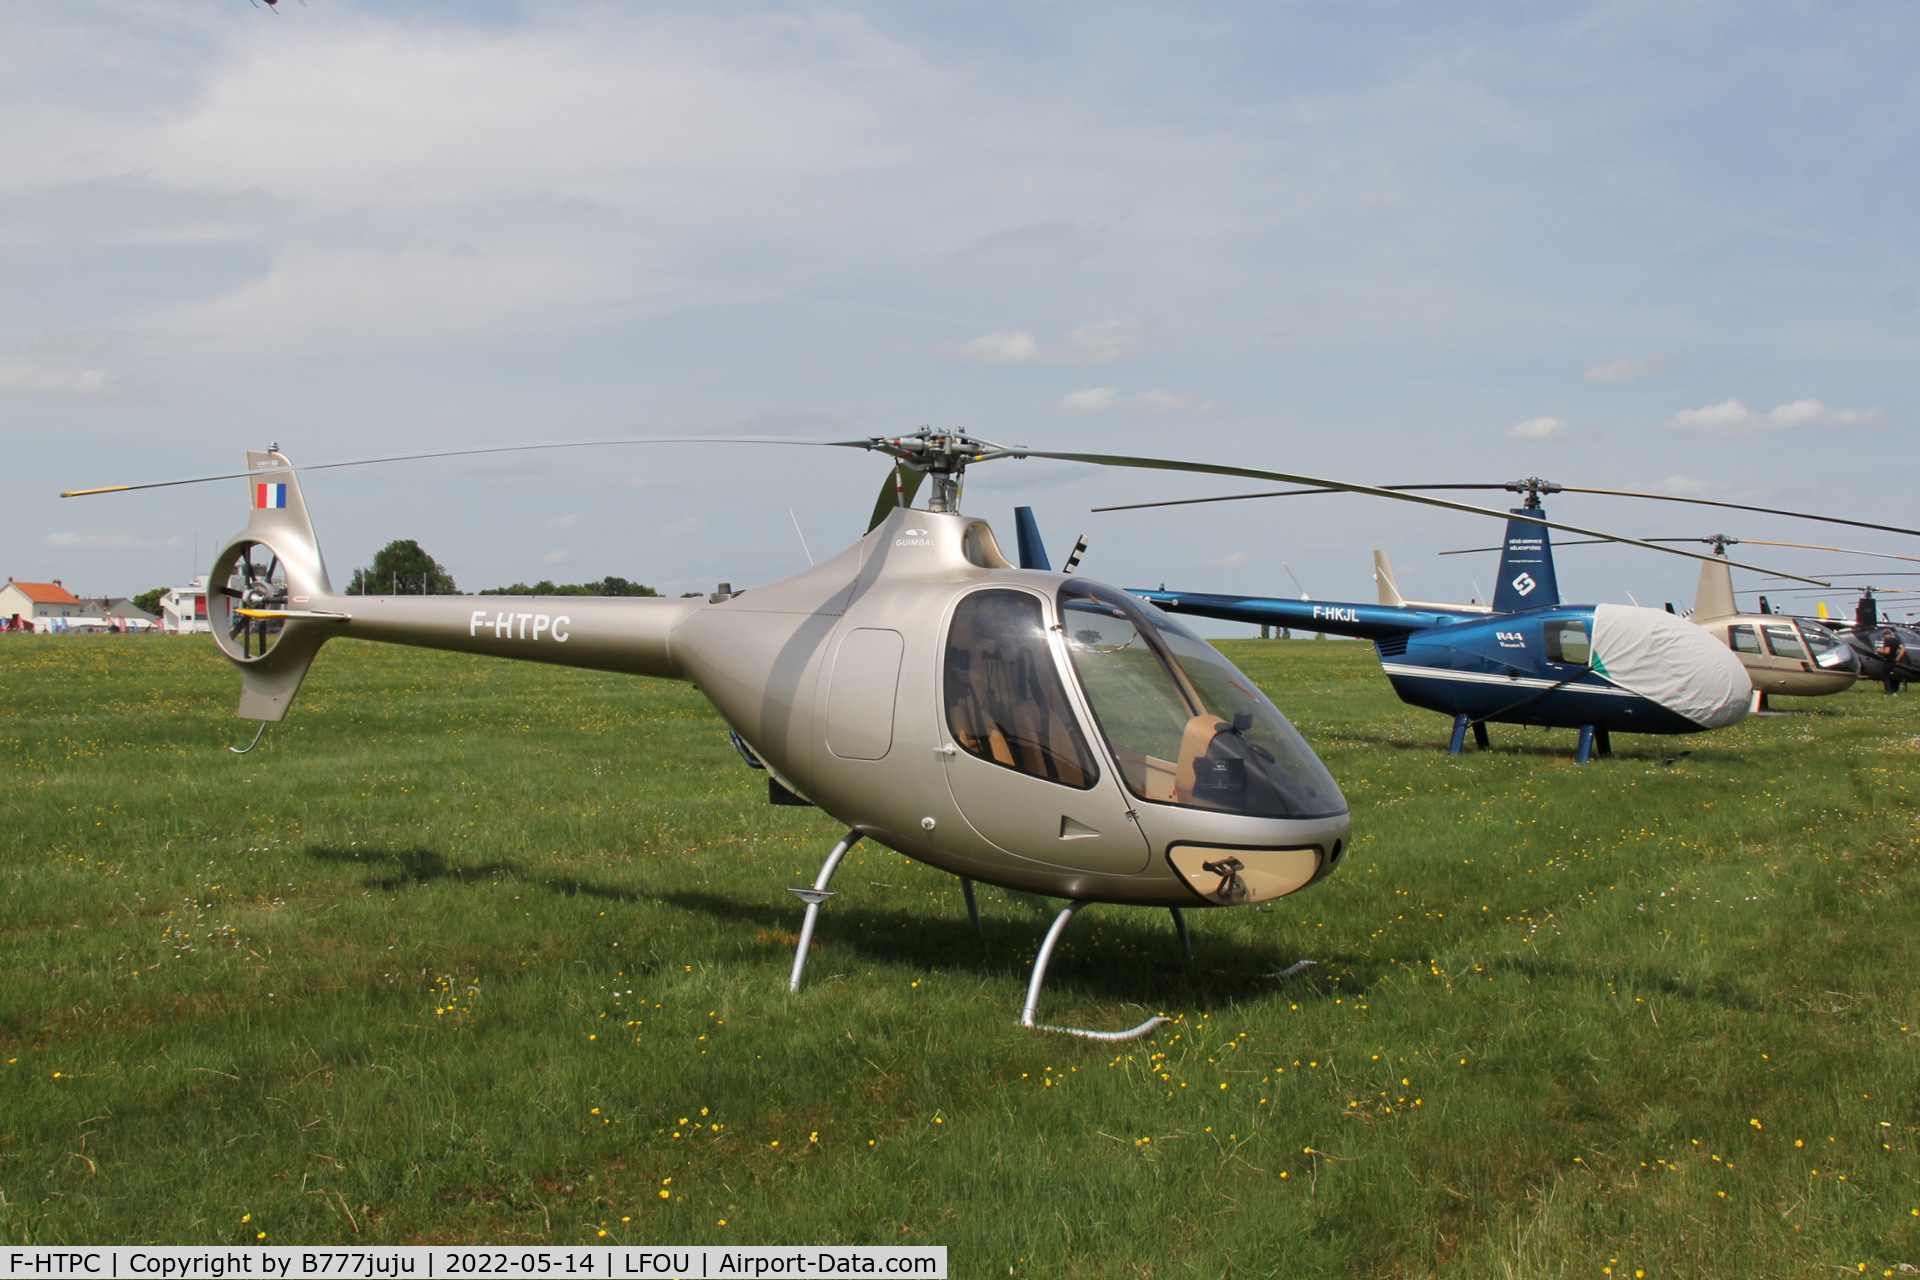 F-HTPC, 2021 Guimbal Cabri G2 C/N 1284, at Helico 2022 Cholet